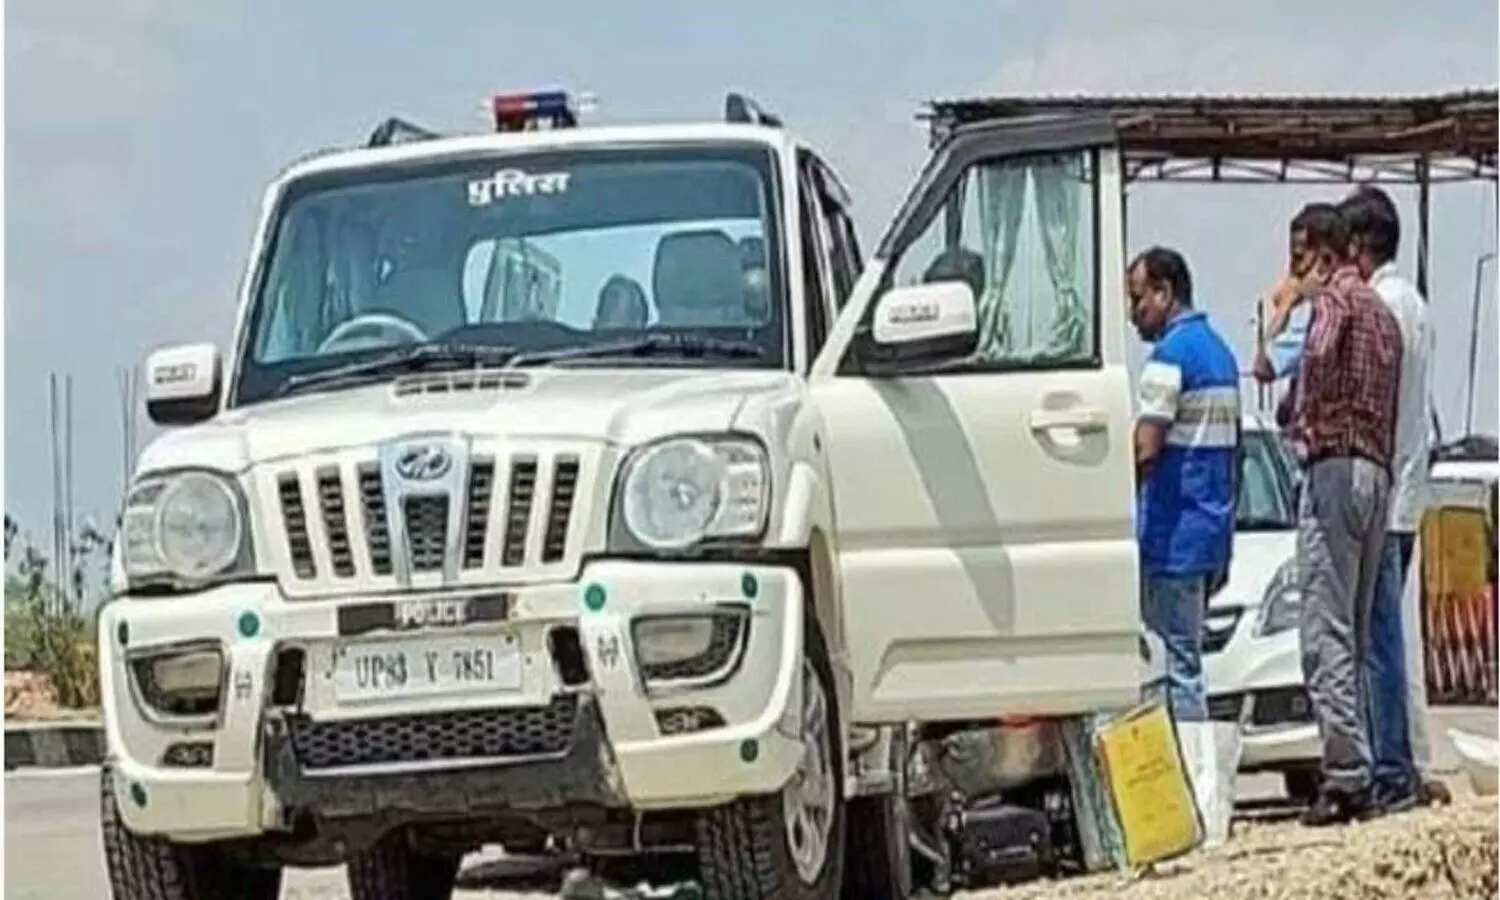 ACB officer checking vehicle